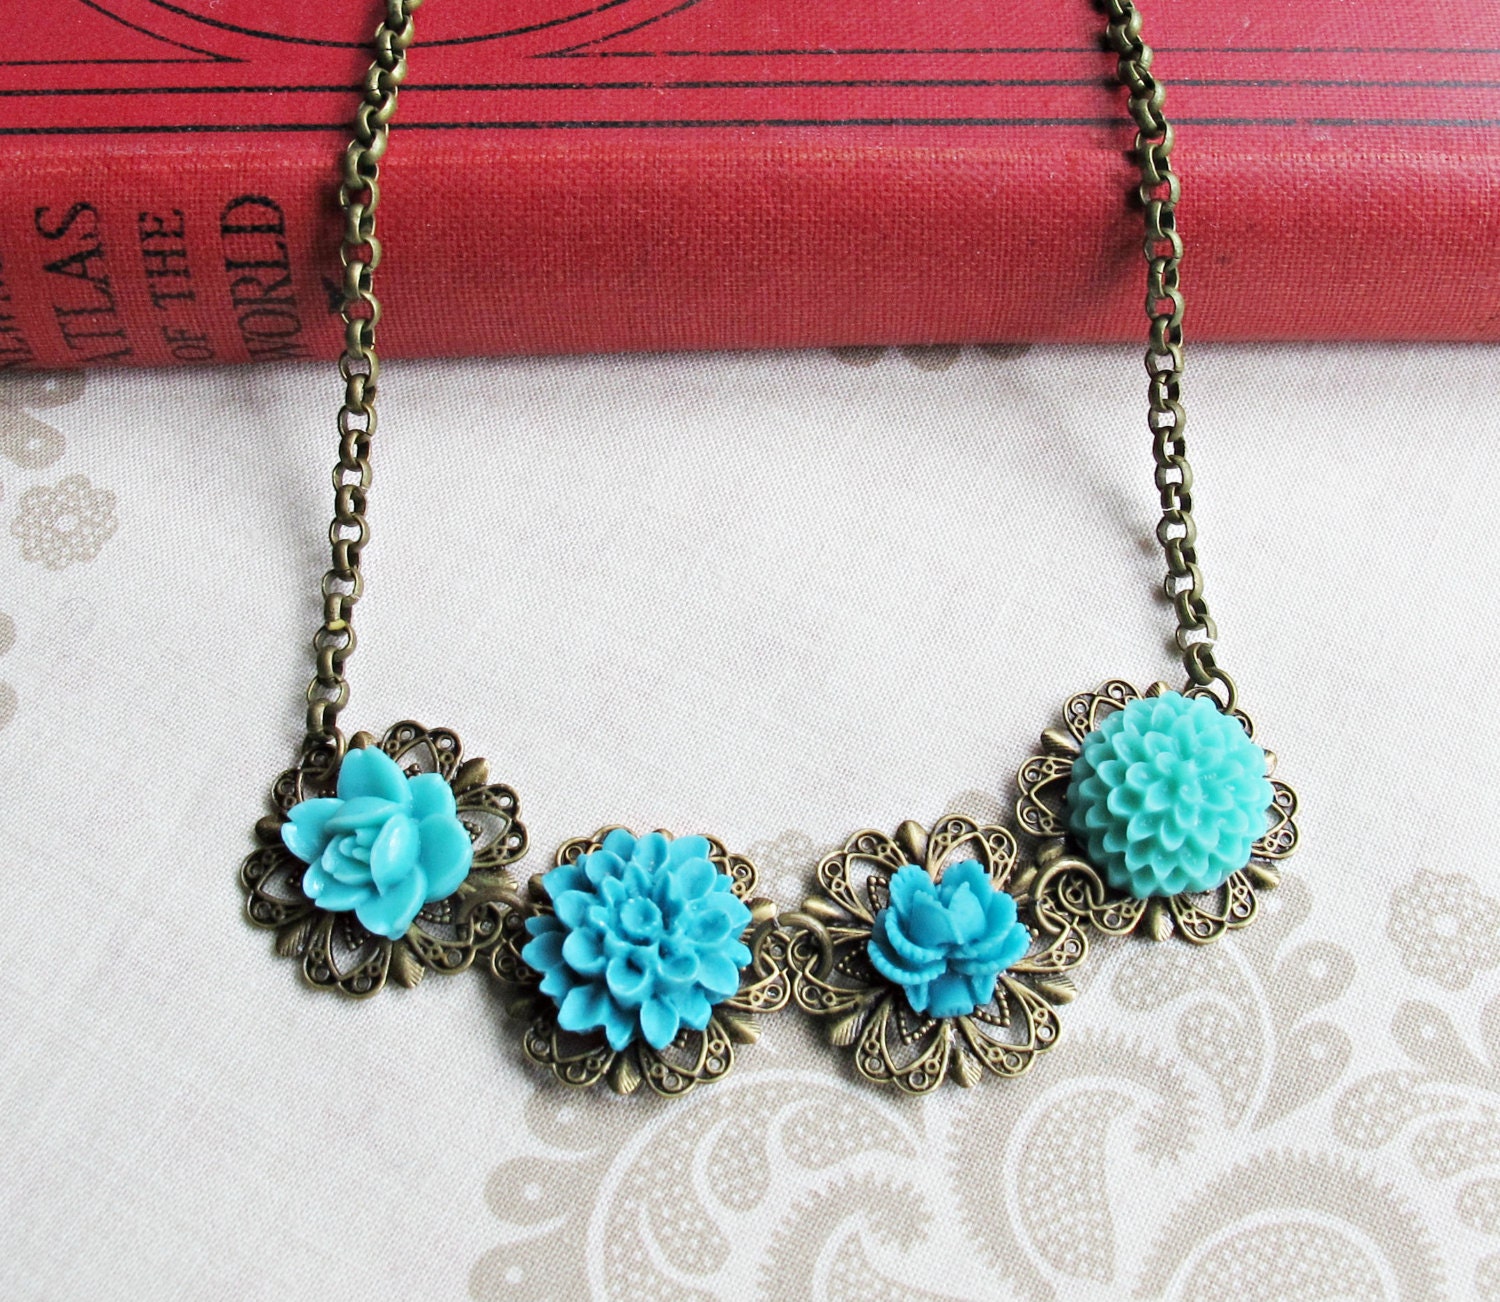 Thalassa Necklace Flower Cabochon Turquoise Blue Brass Brown Cute Charm Jewellery by dspdavey on Etsy - dspdavey